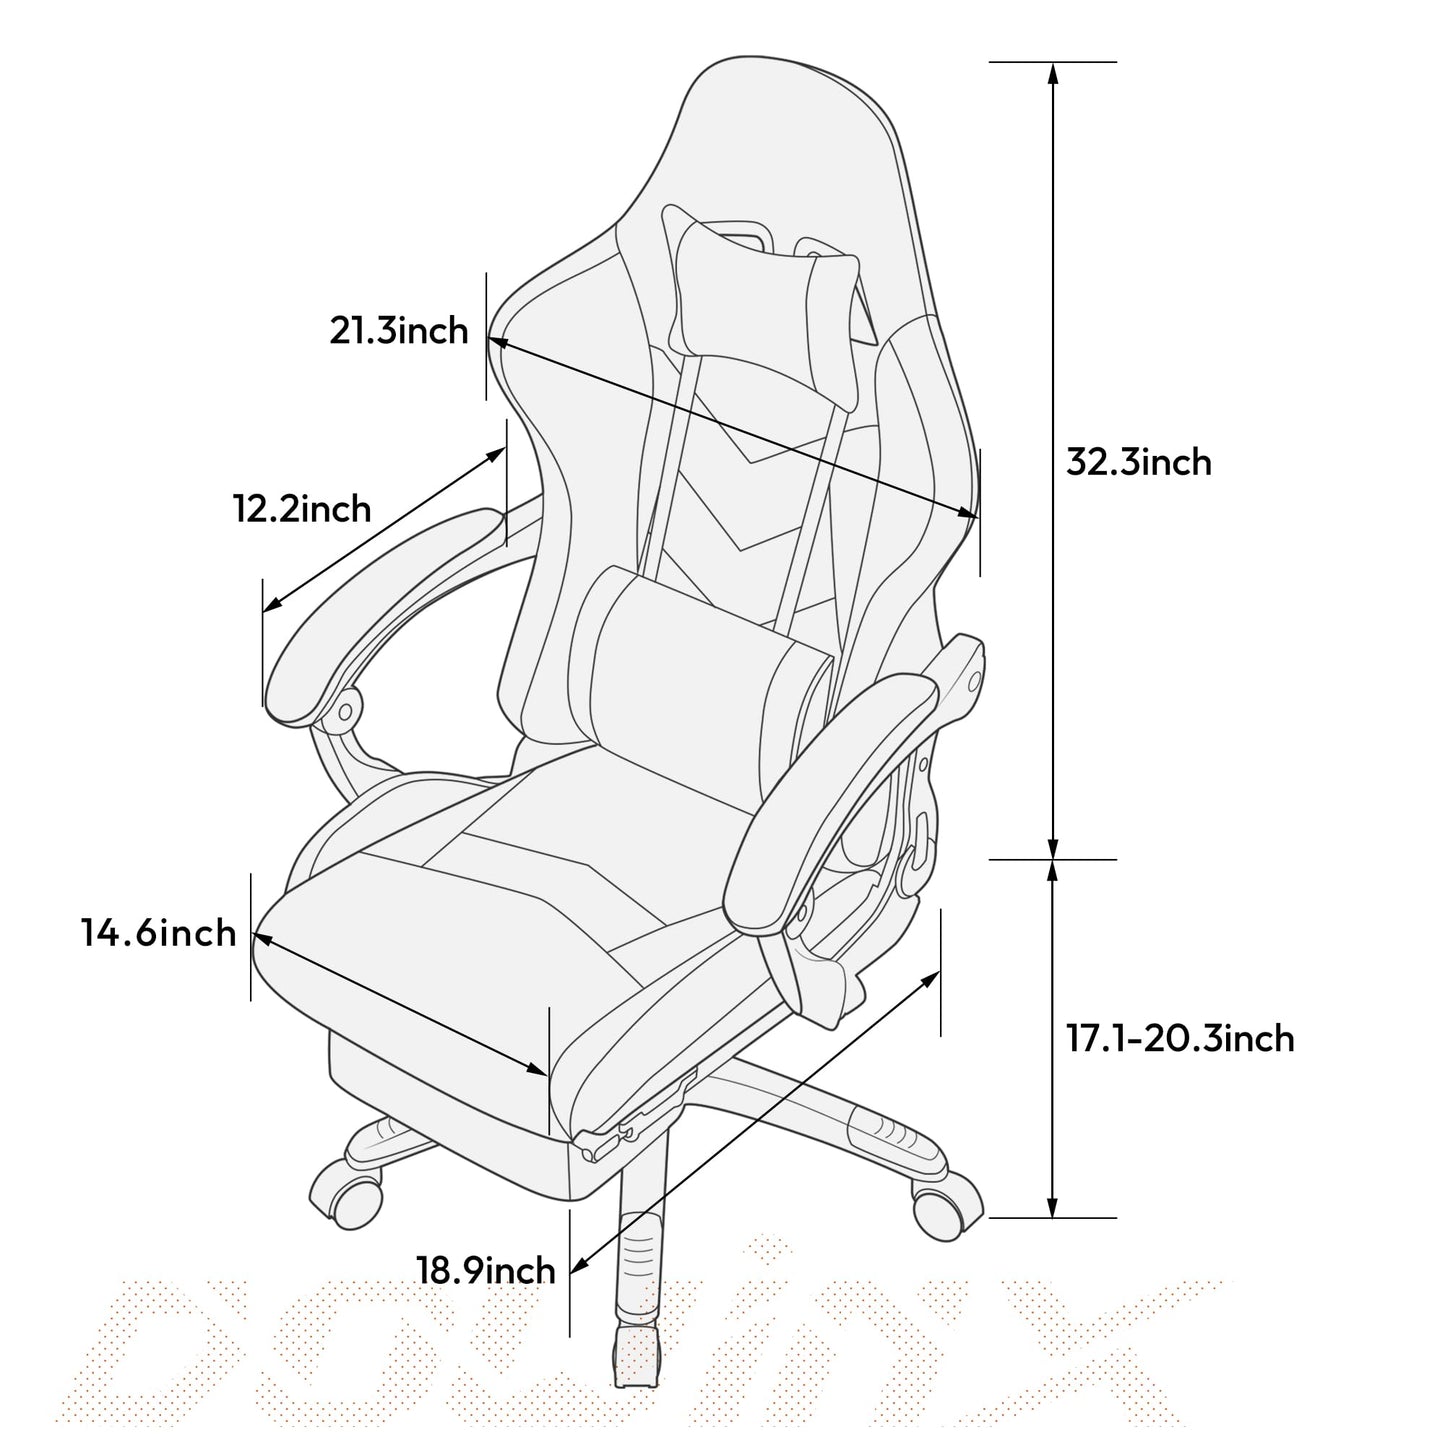 Dowinx Gaming Chair Ergonomic Racing Style Recliner with Massage Lumbar Support, Office Armchair for Computer PU Leather E-Sports Gamer Chairs with Retractable Footrest (Black&Orange)